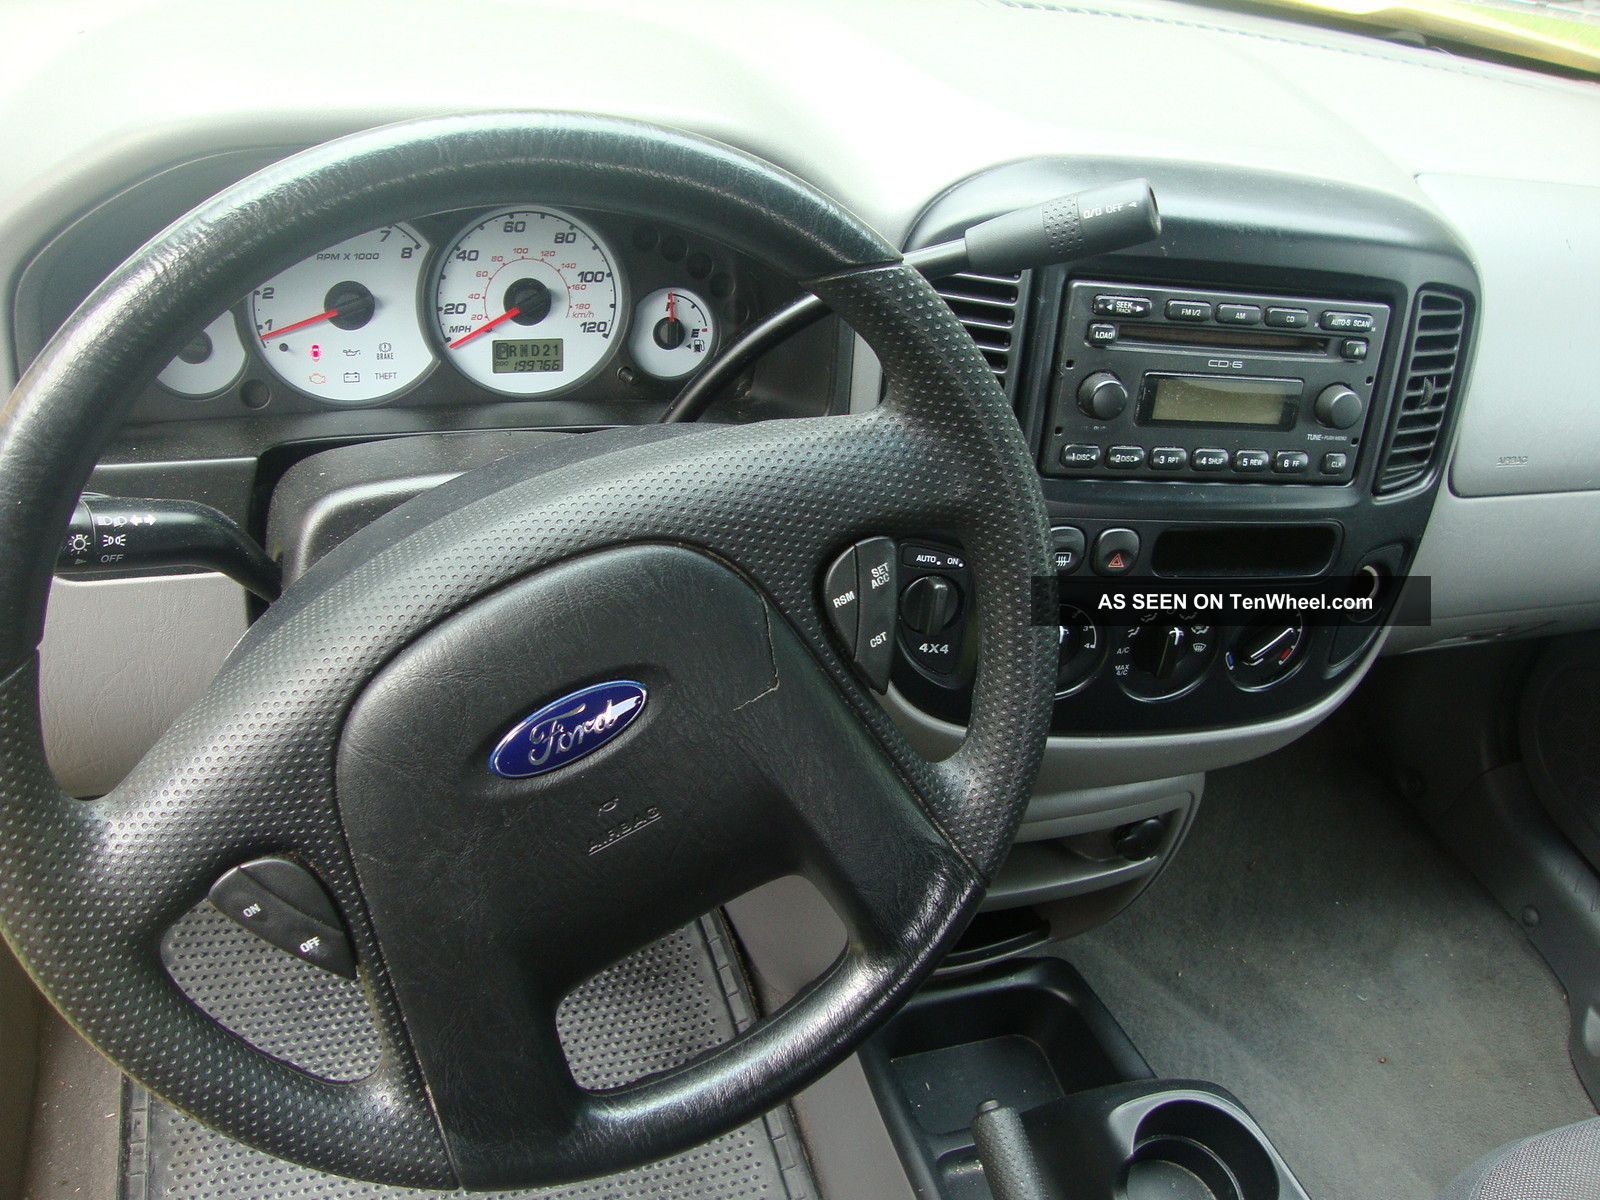 2001 Ford escape xlt suv specs #3